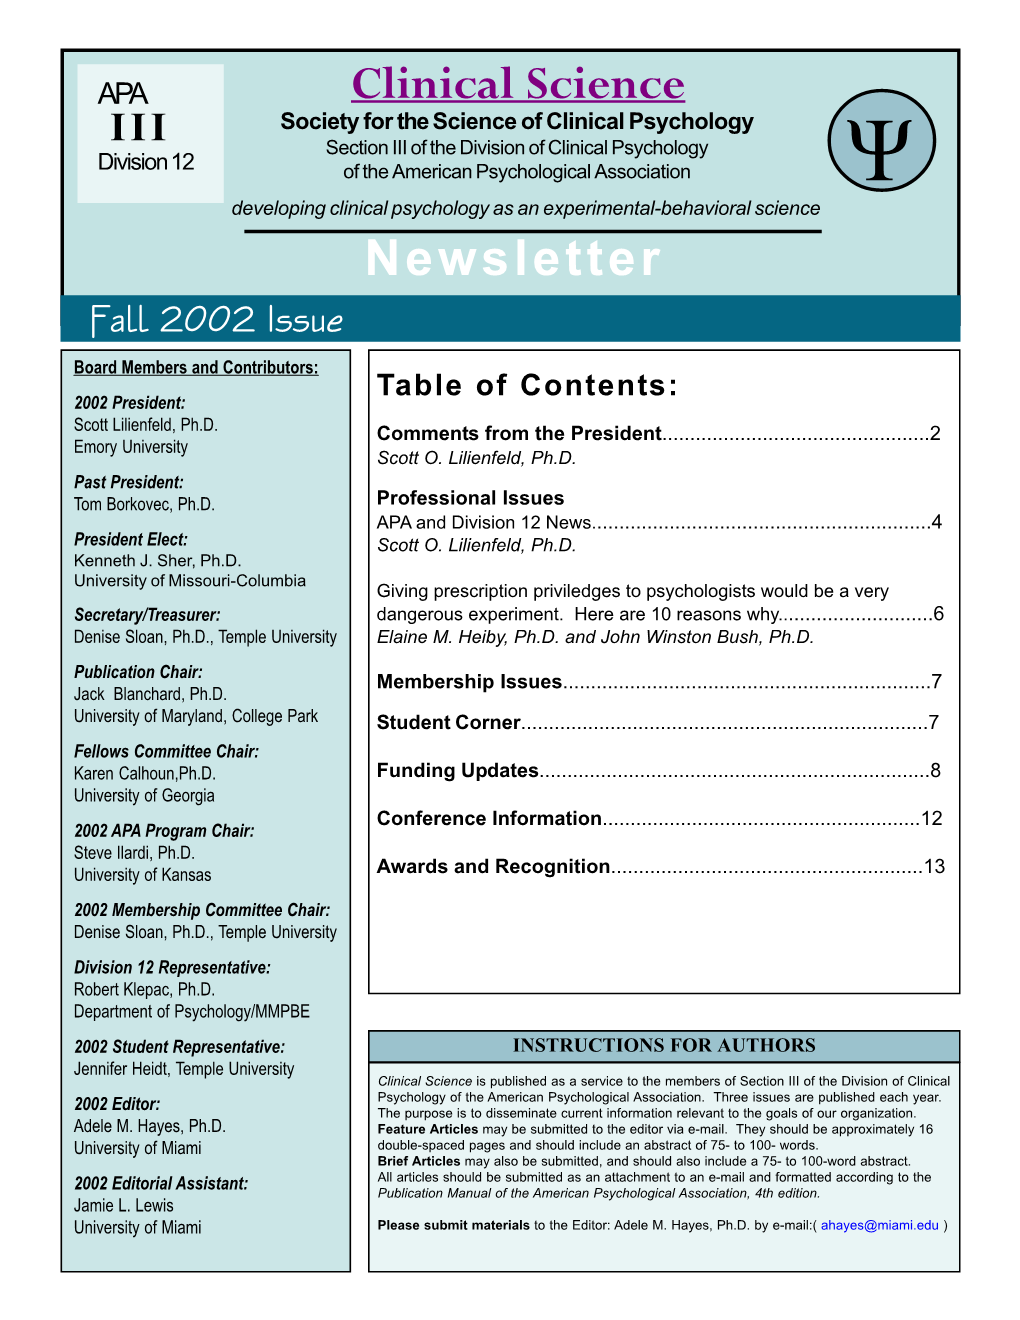 Fall 2002 Issue Board Members and Contributors: Table of Contents: 2002 President: Scott Lilienfeld, Ph.D